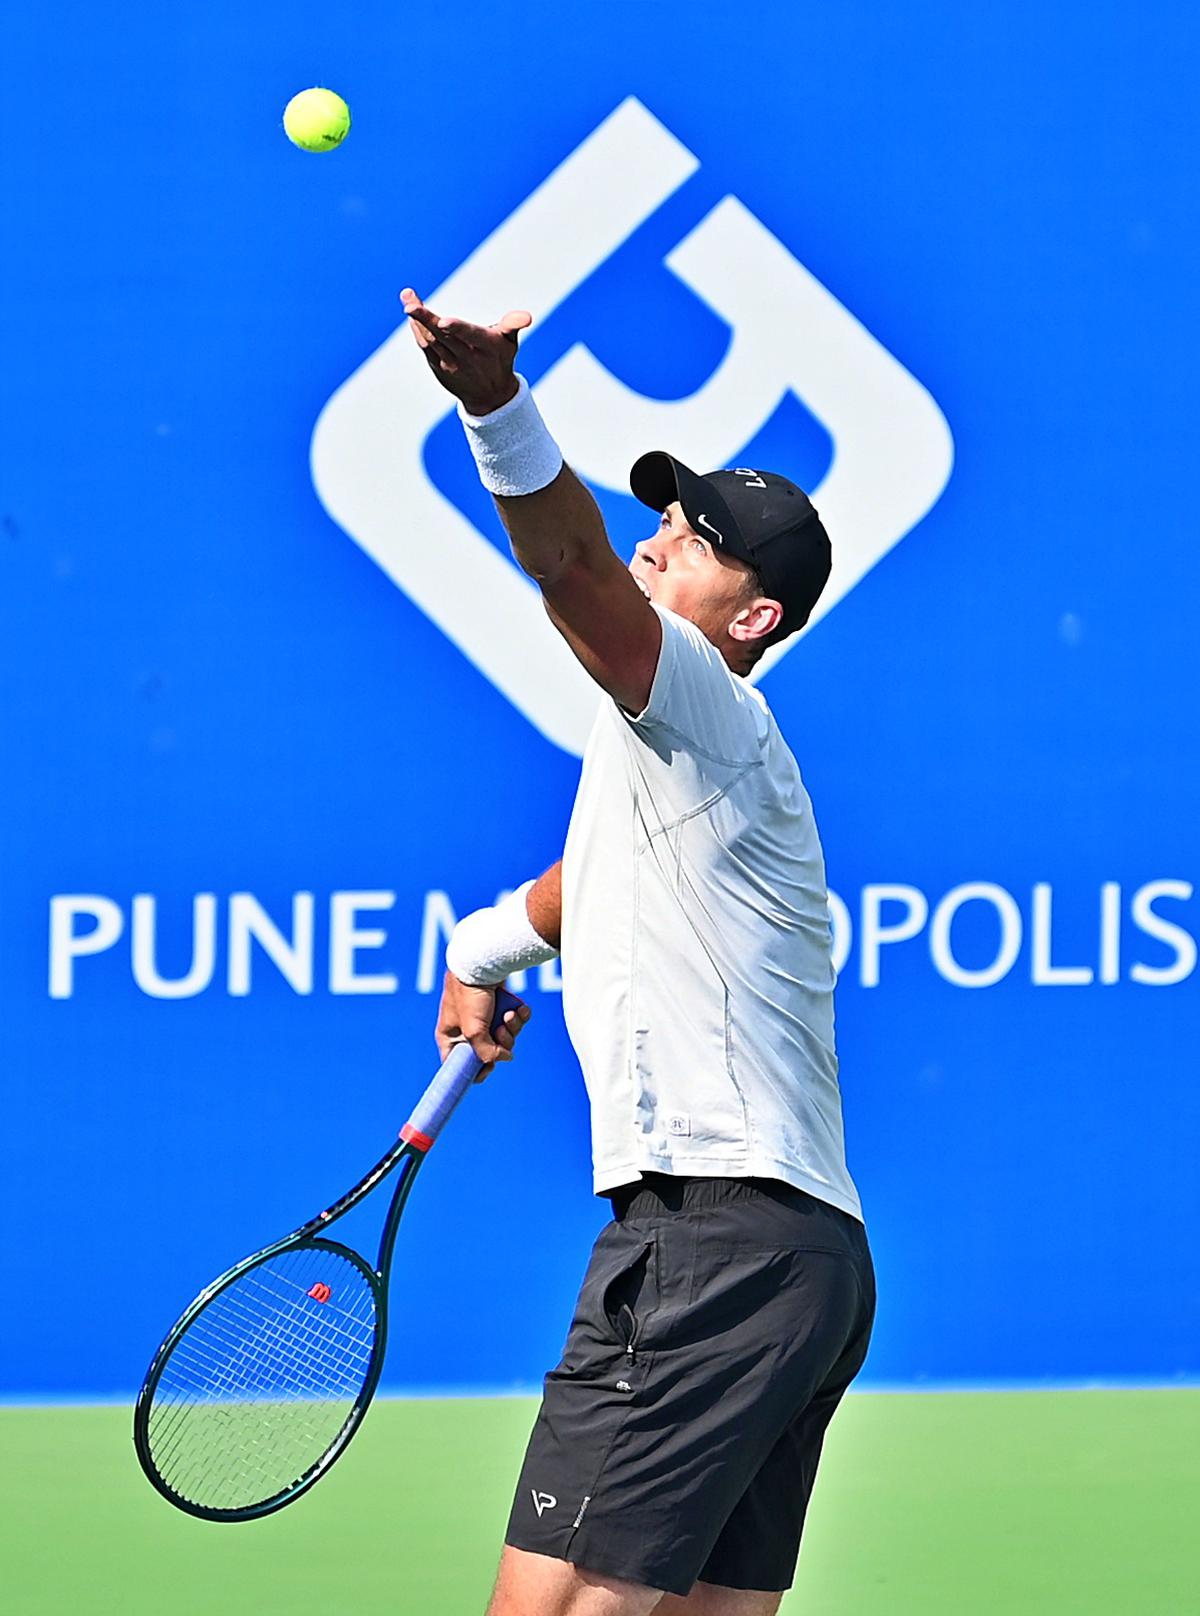 Former world No.25 Vasek Pospisil in action in the Maha Open
Challenger tennis tournament in Pune on Sunday 